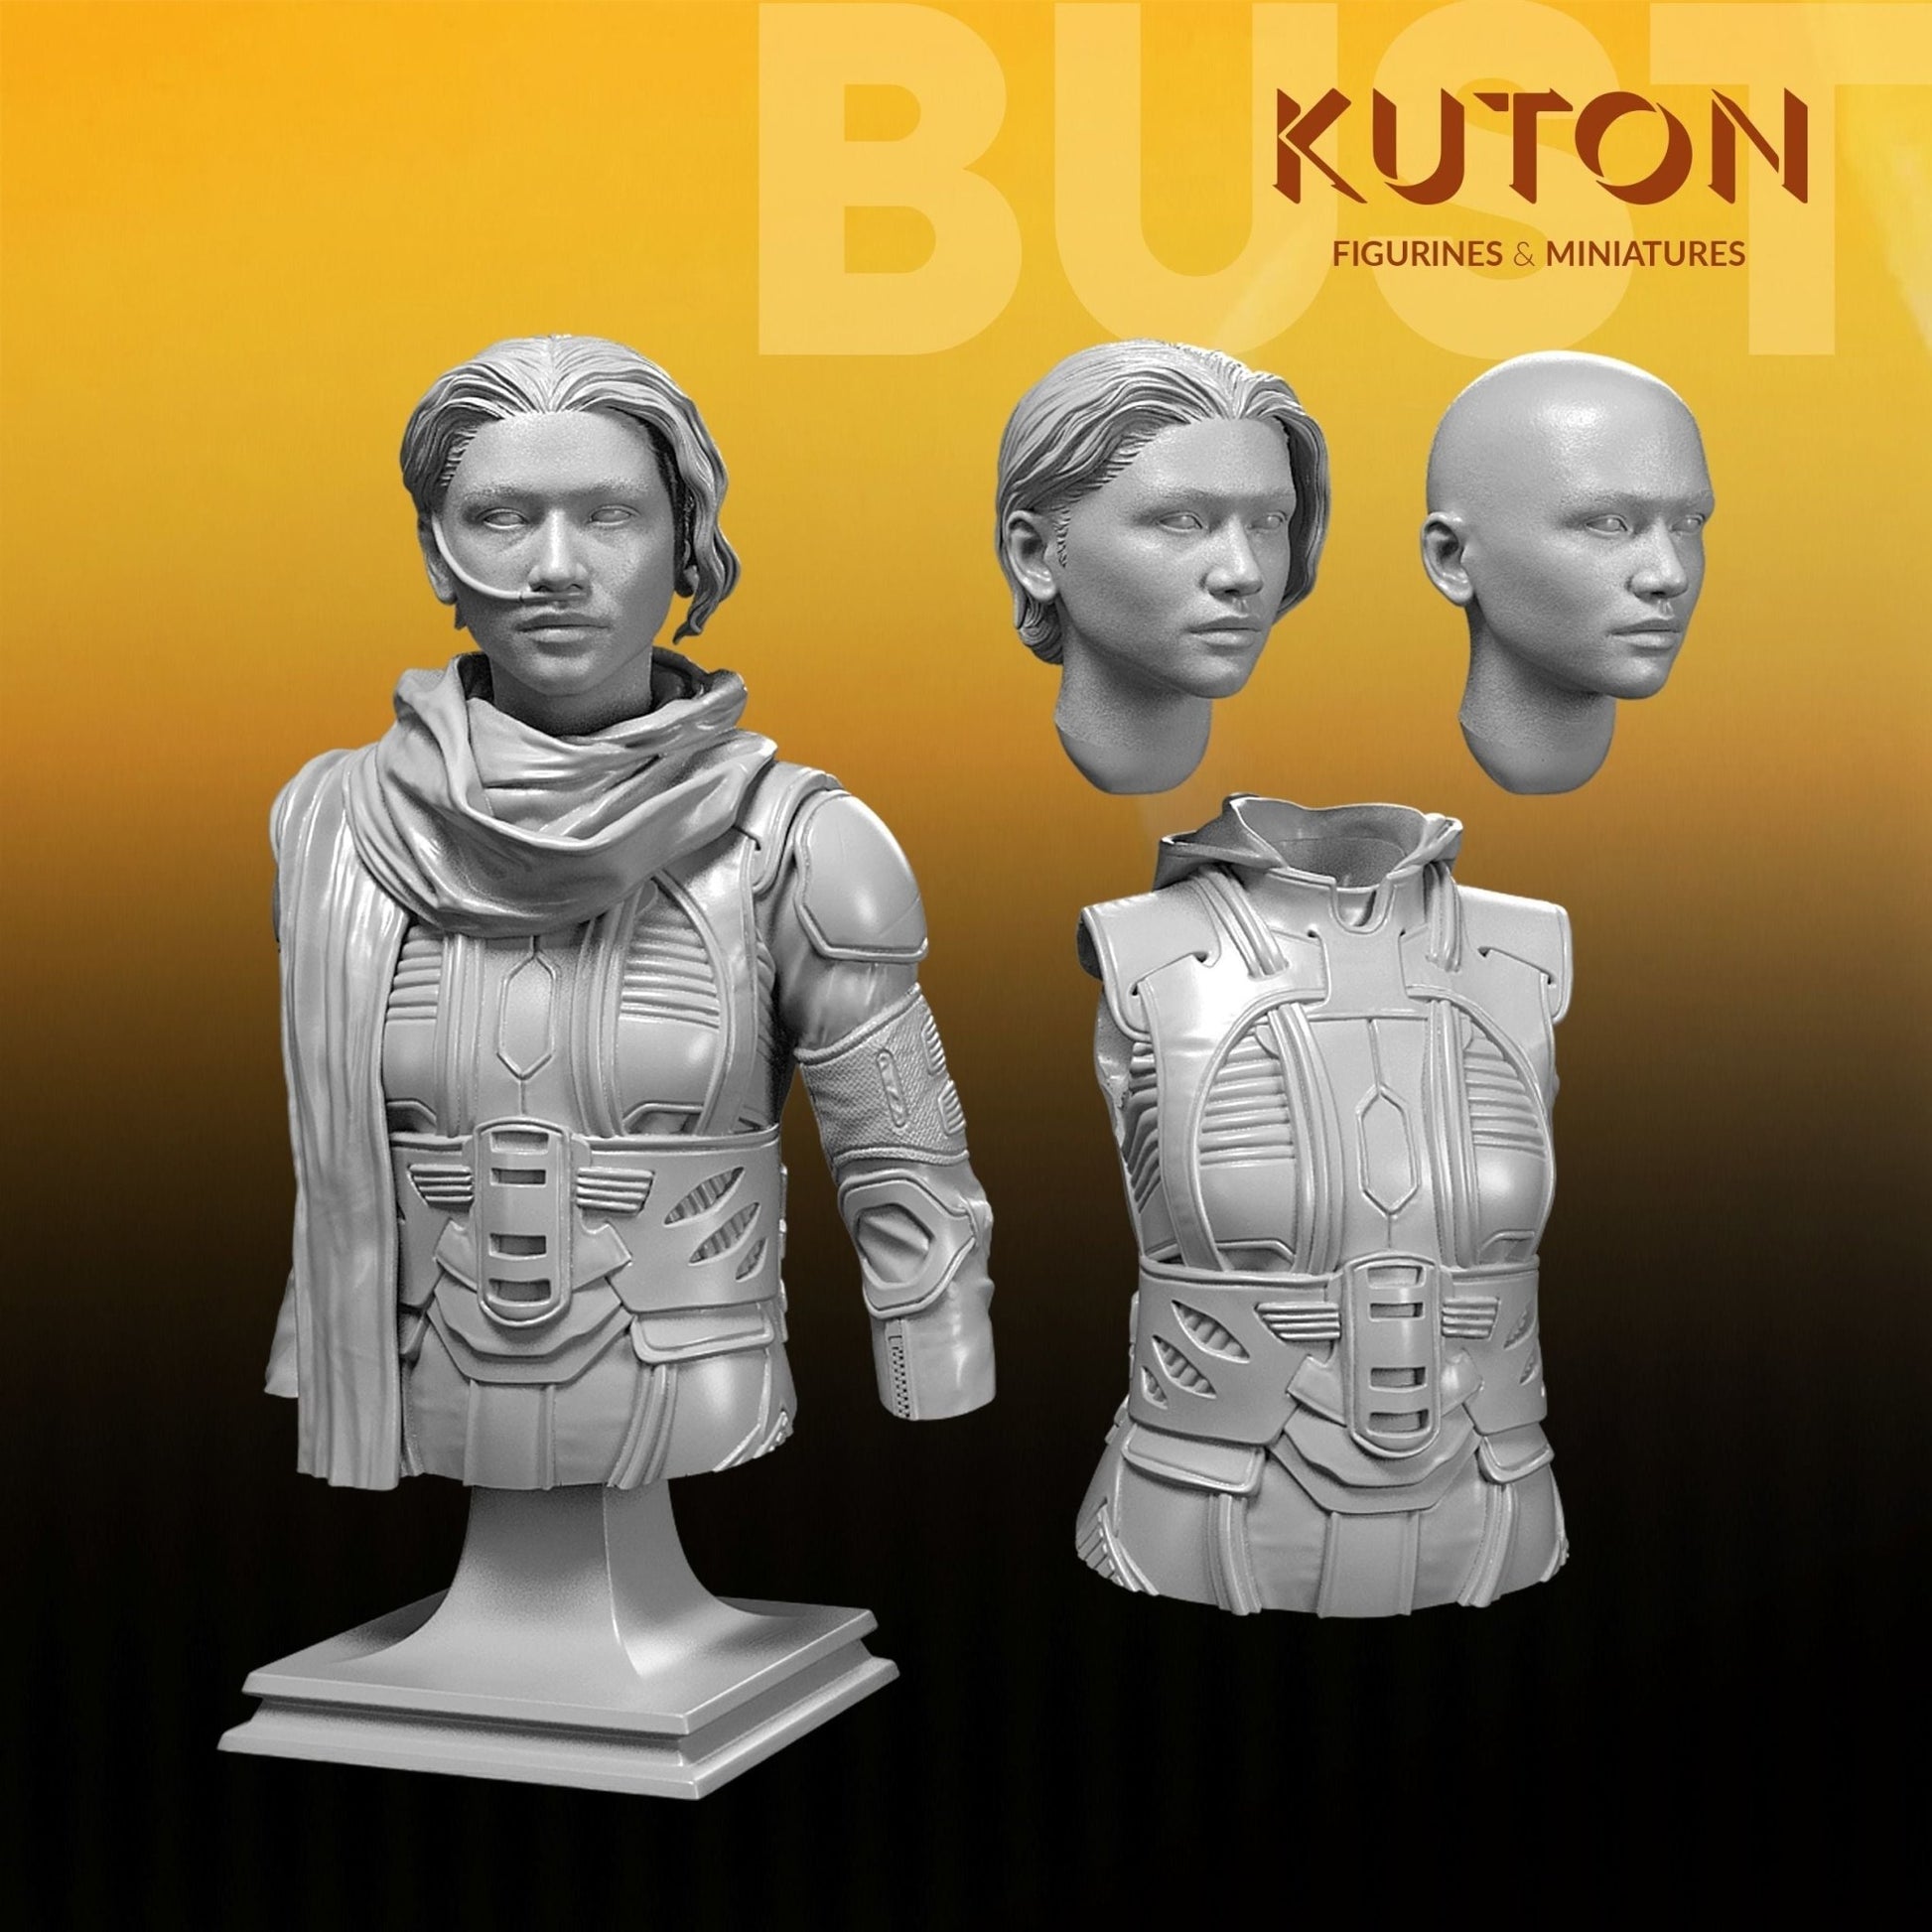 Chani Kynes BUST 3d printed Resin Figure Model Kit miniatures figurines collectibles and scale models UNPAINTED Fun Art by KUTON FIGURINES